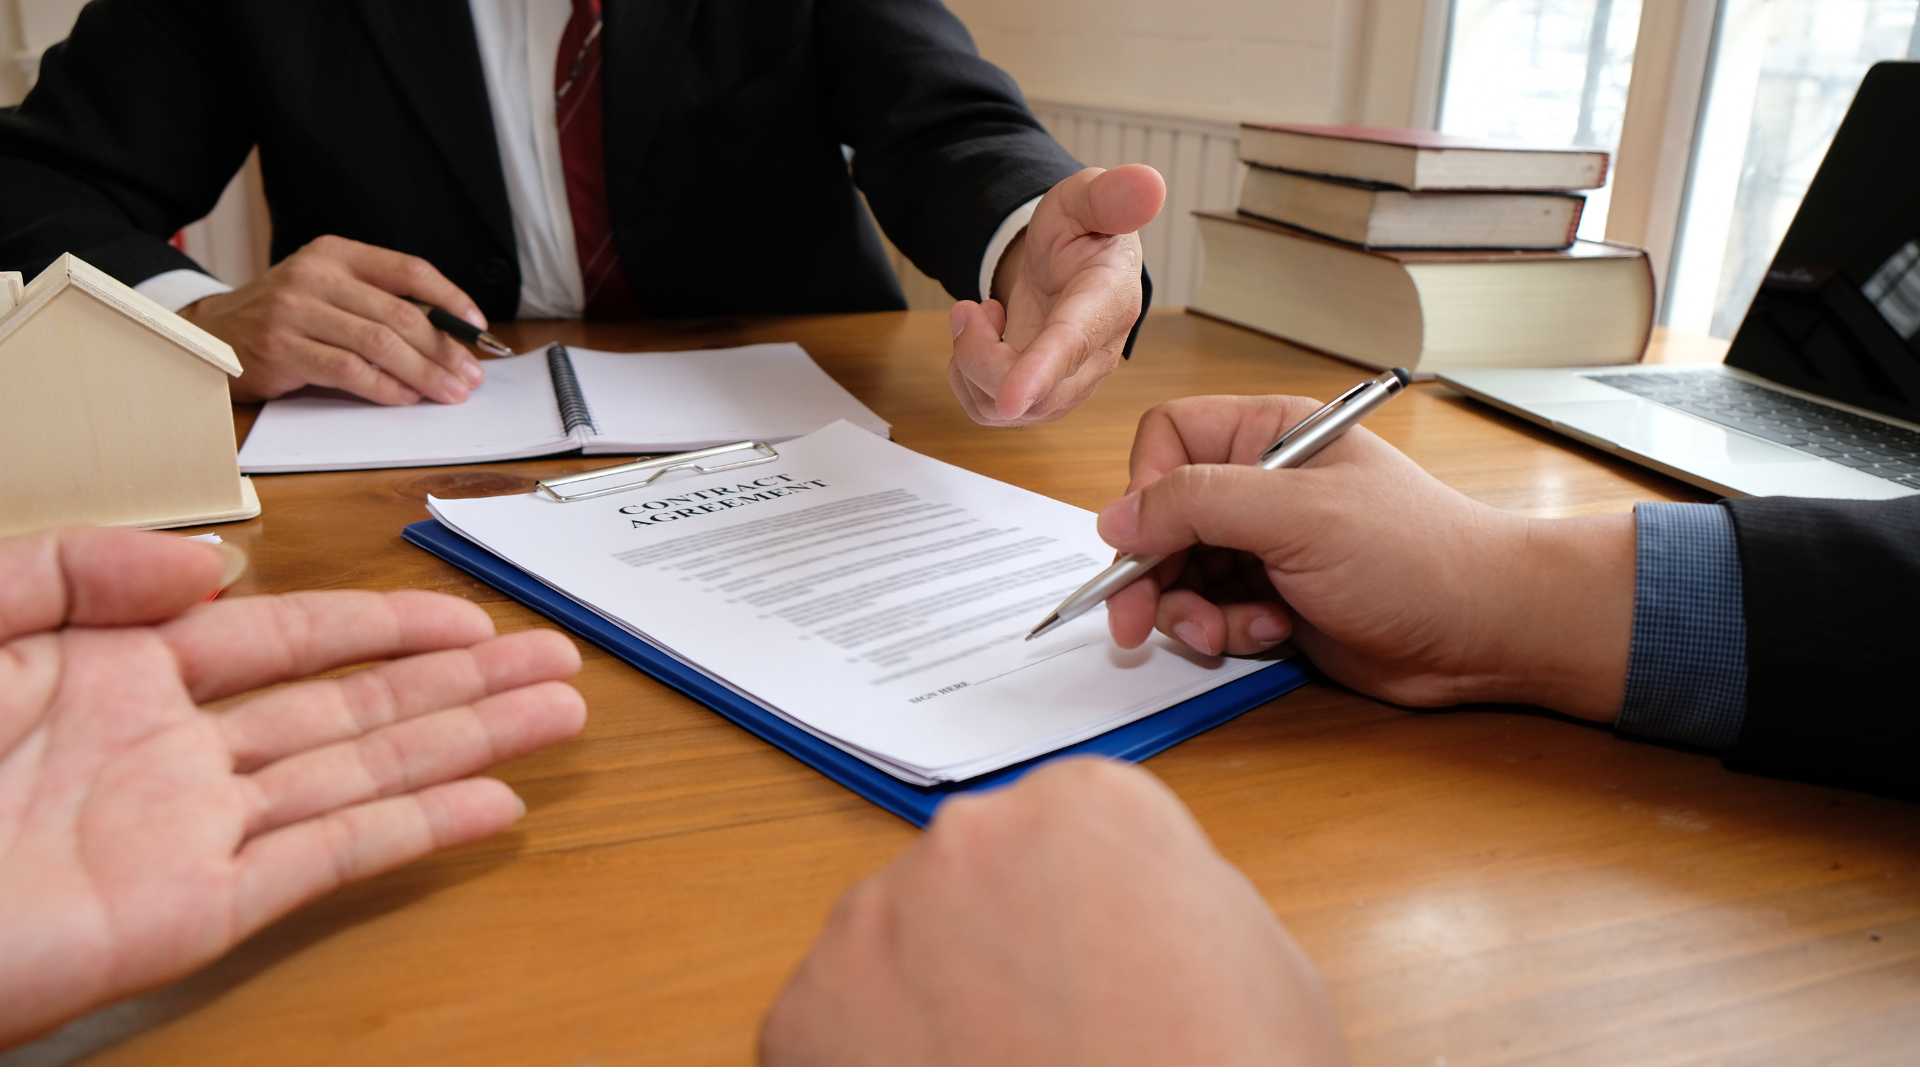 What Are The Benefits And Risks Of Using A Co-Signer